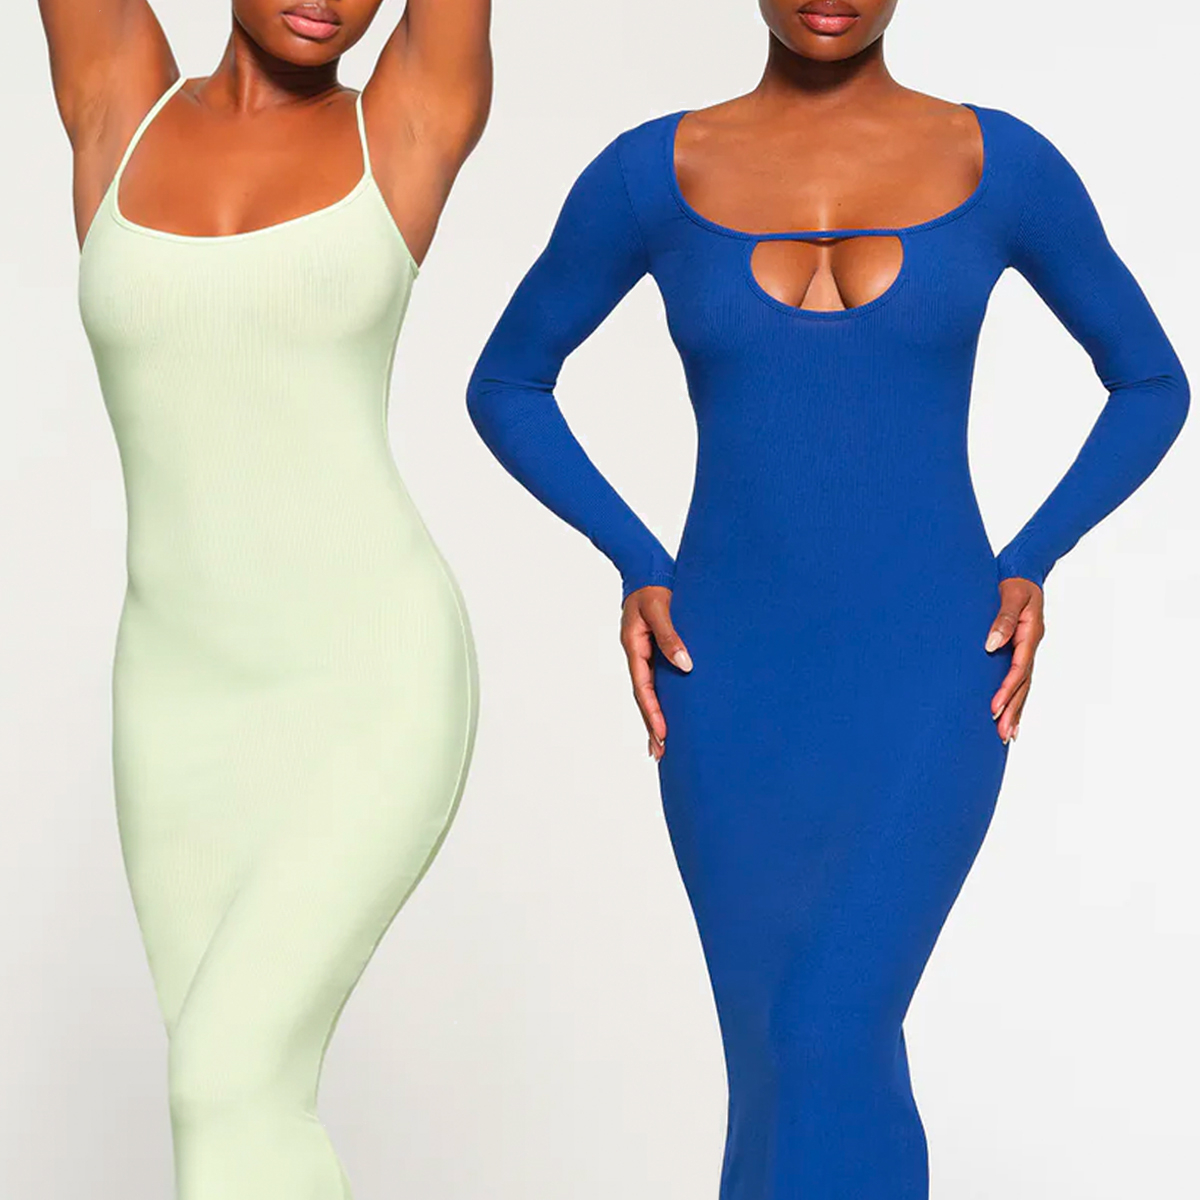 SKIMS on X: JUST DROPPED: NEW SOFT LOUNGE. The internet's favorite  flattering, ribbed sets and slinky dresses are back in fresh colors and a  new must-have Scoop Neck Mini Dress!    /